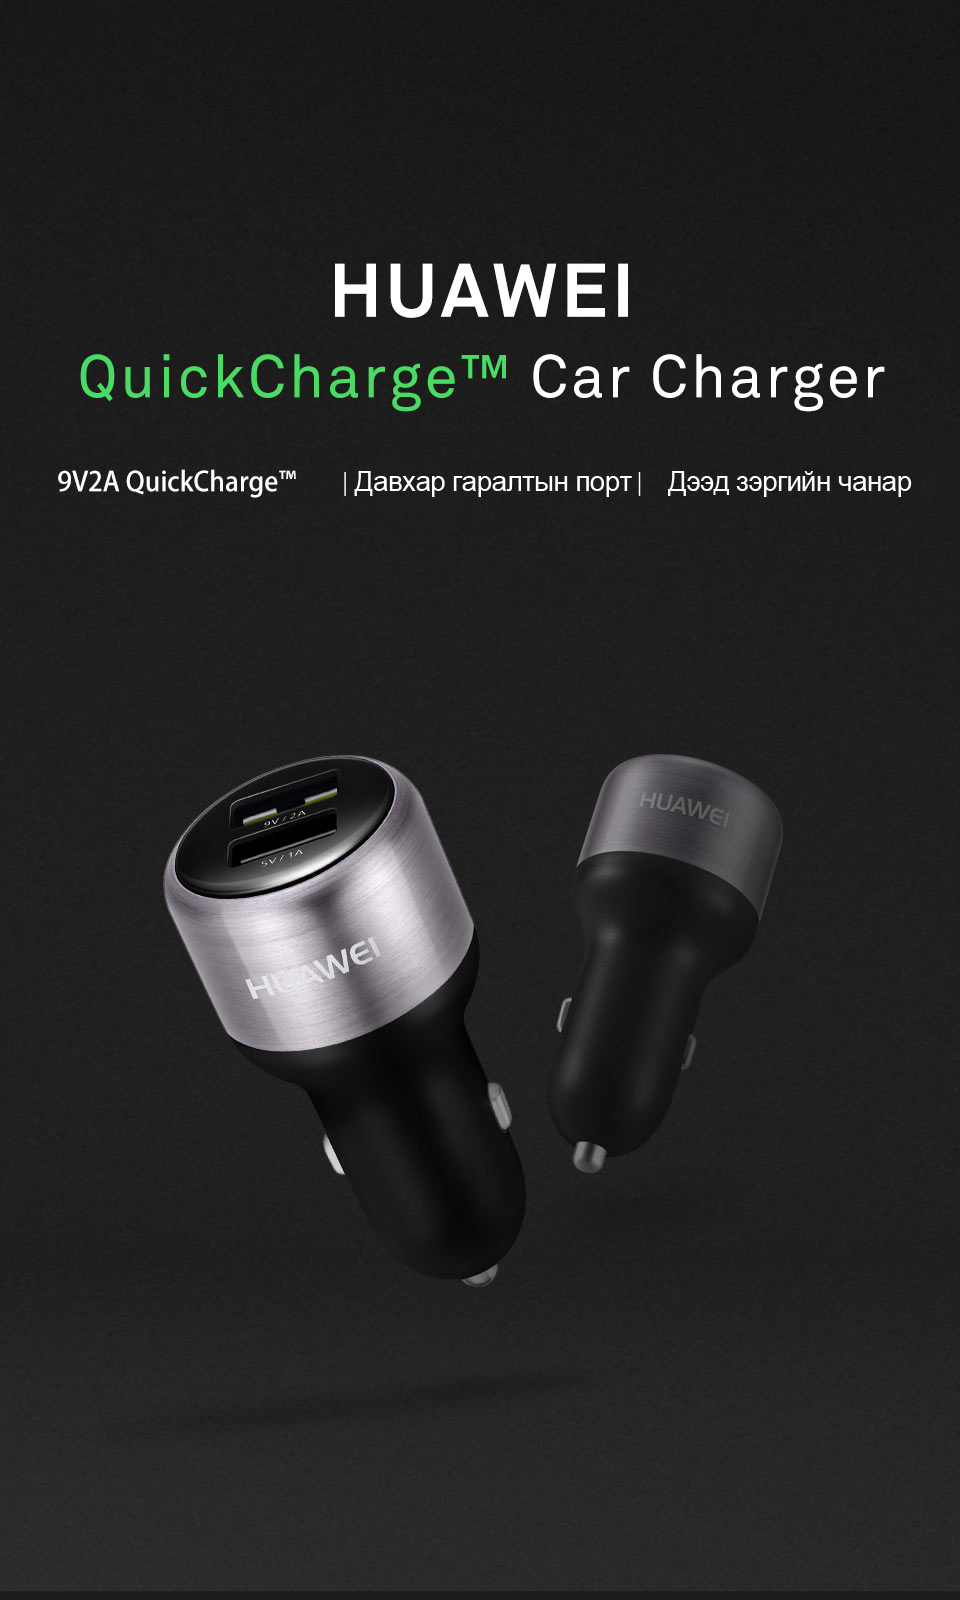 HUAWEI QuickCharge™ Car Charger KV